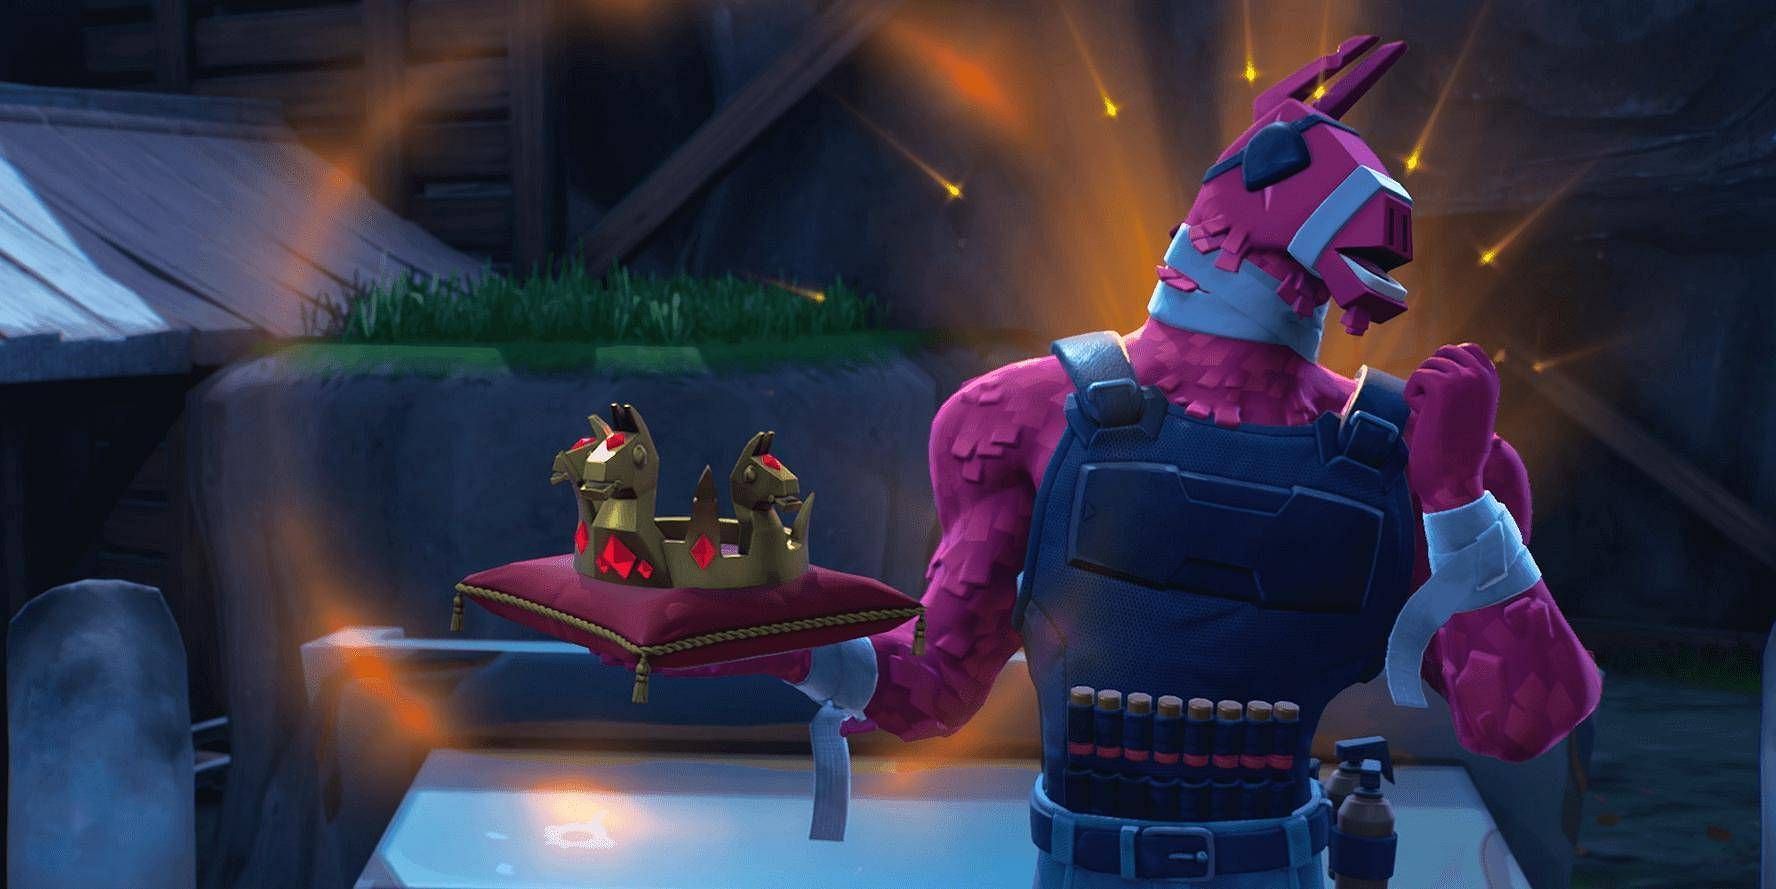 Does Victory Crown emote show wins above 100? (Image via Epic Games)